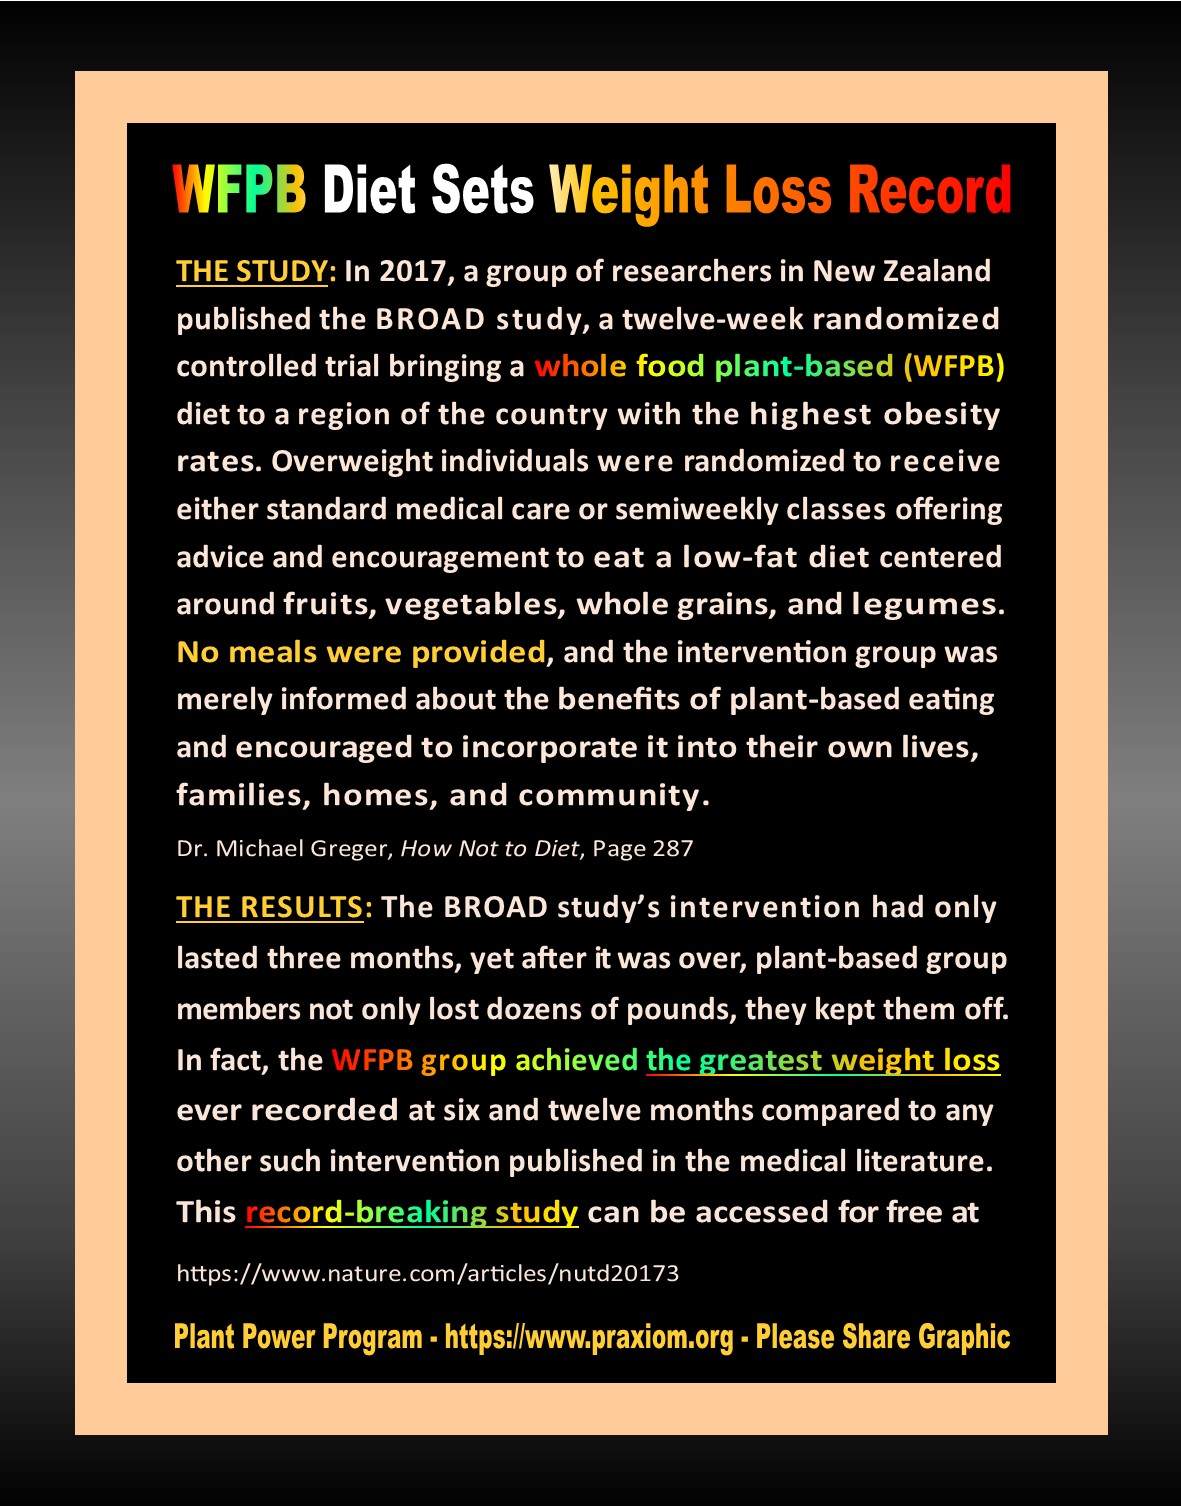 WFPB Diet Sets Weight Loss Record - Dr. Michael Greger